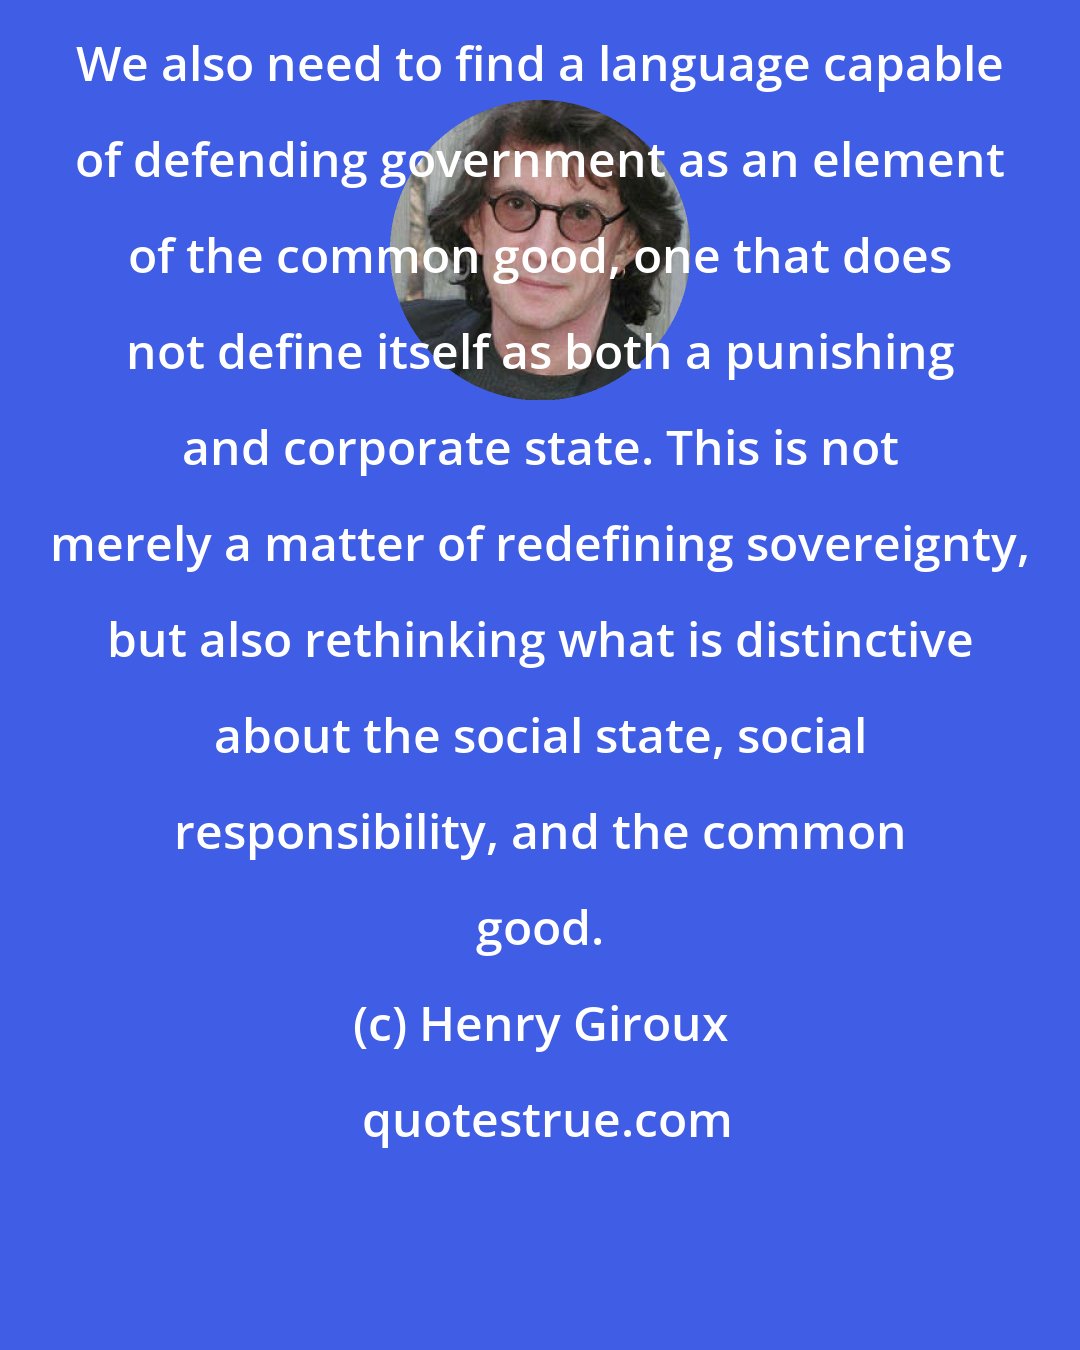 Henry Giroux: We also need to find a language capable of defending government as an element of the common good, one that does not define itself as both a punishing and corporate state. This is not merely a matter of redefining sovereignty, but also rethinking what is distinctive about the social state, social responsibility, and the common good.